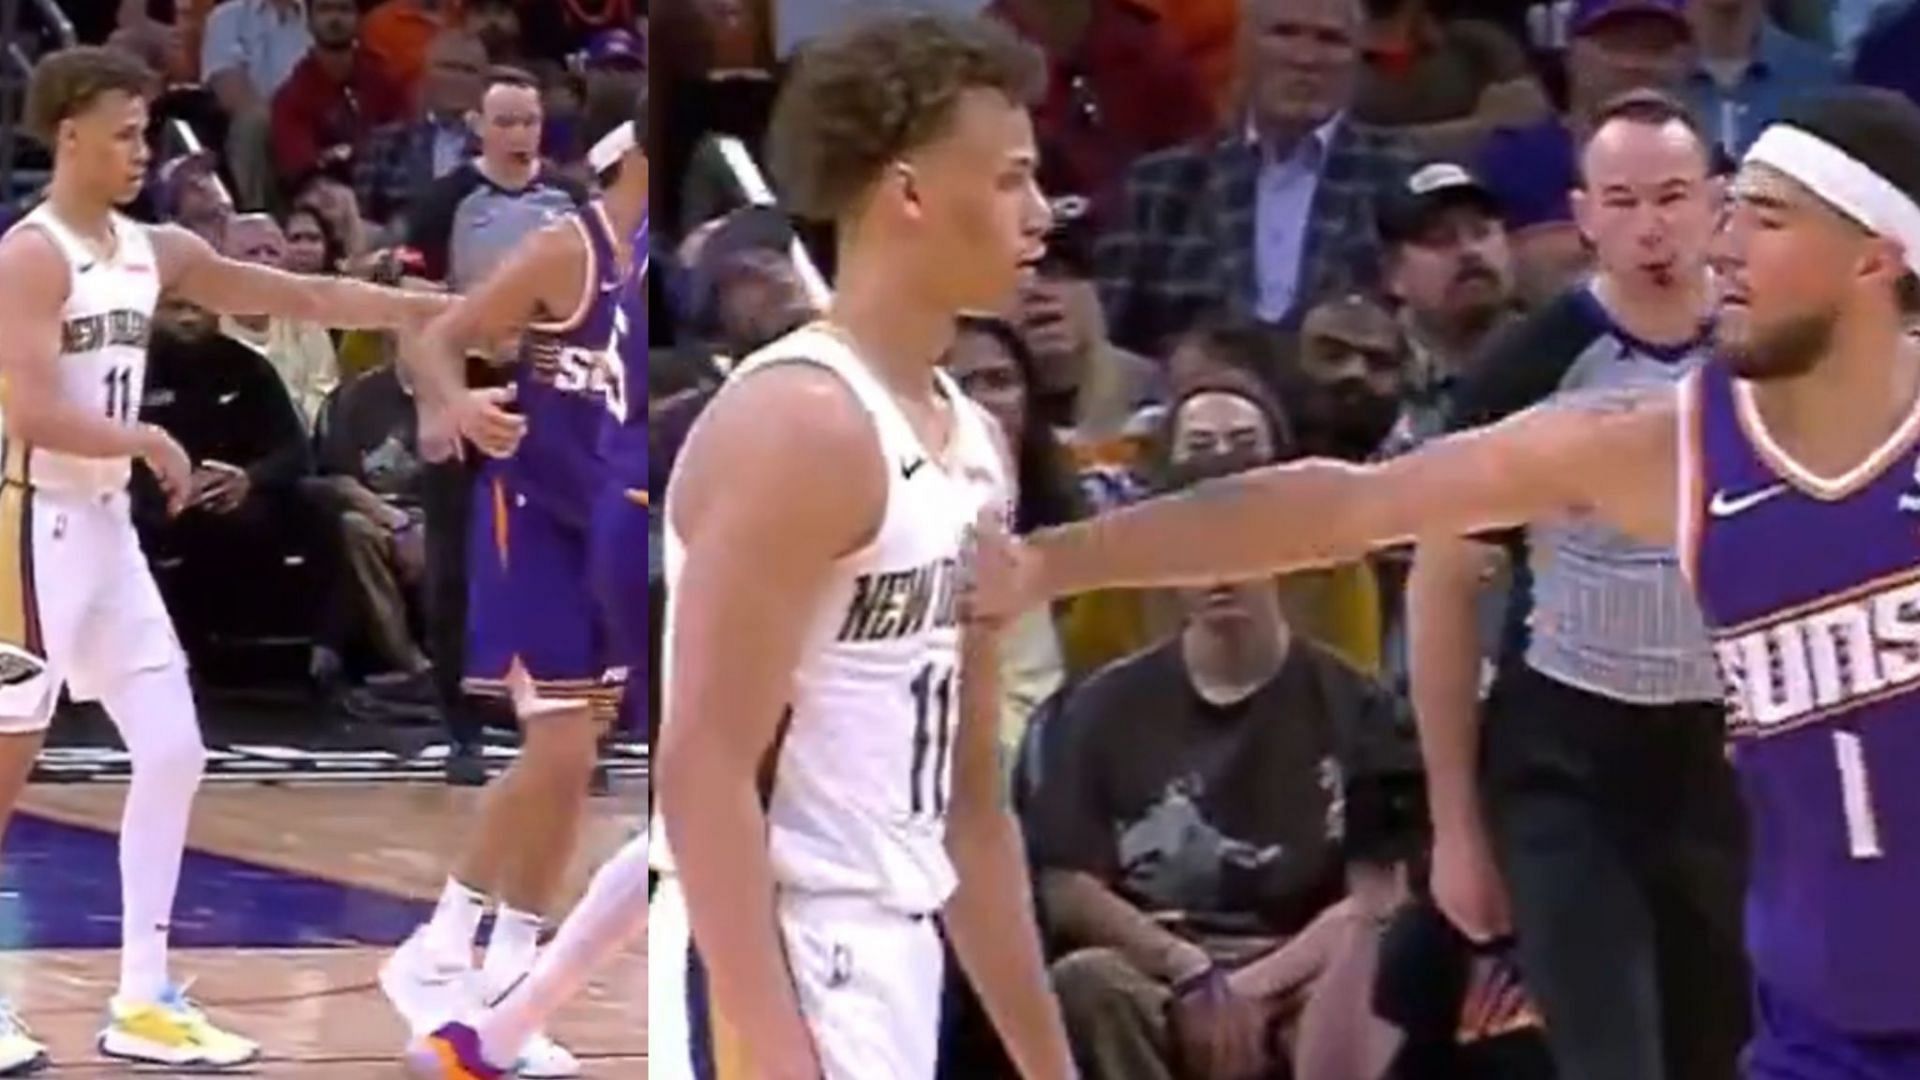 Dyson Daniels and Devin Booker have a shoving match during Sunday